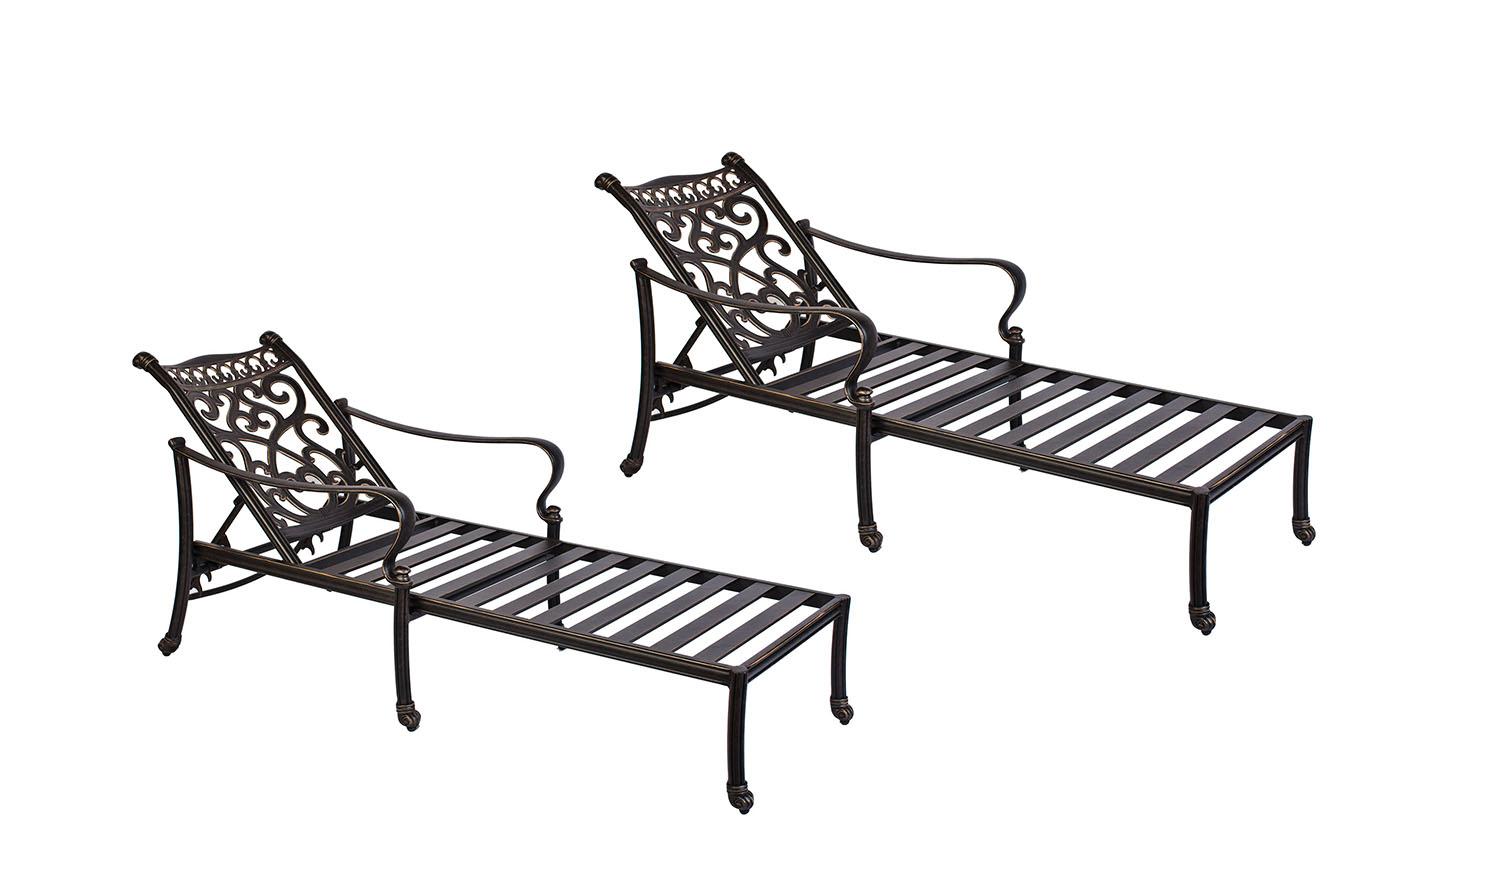 Contemporary Patio Chaise Lounger Alexis PCCL-Set-2 in Natural, Bronze Fabric